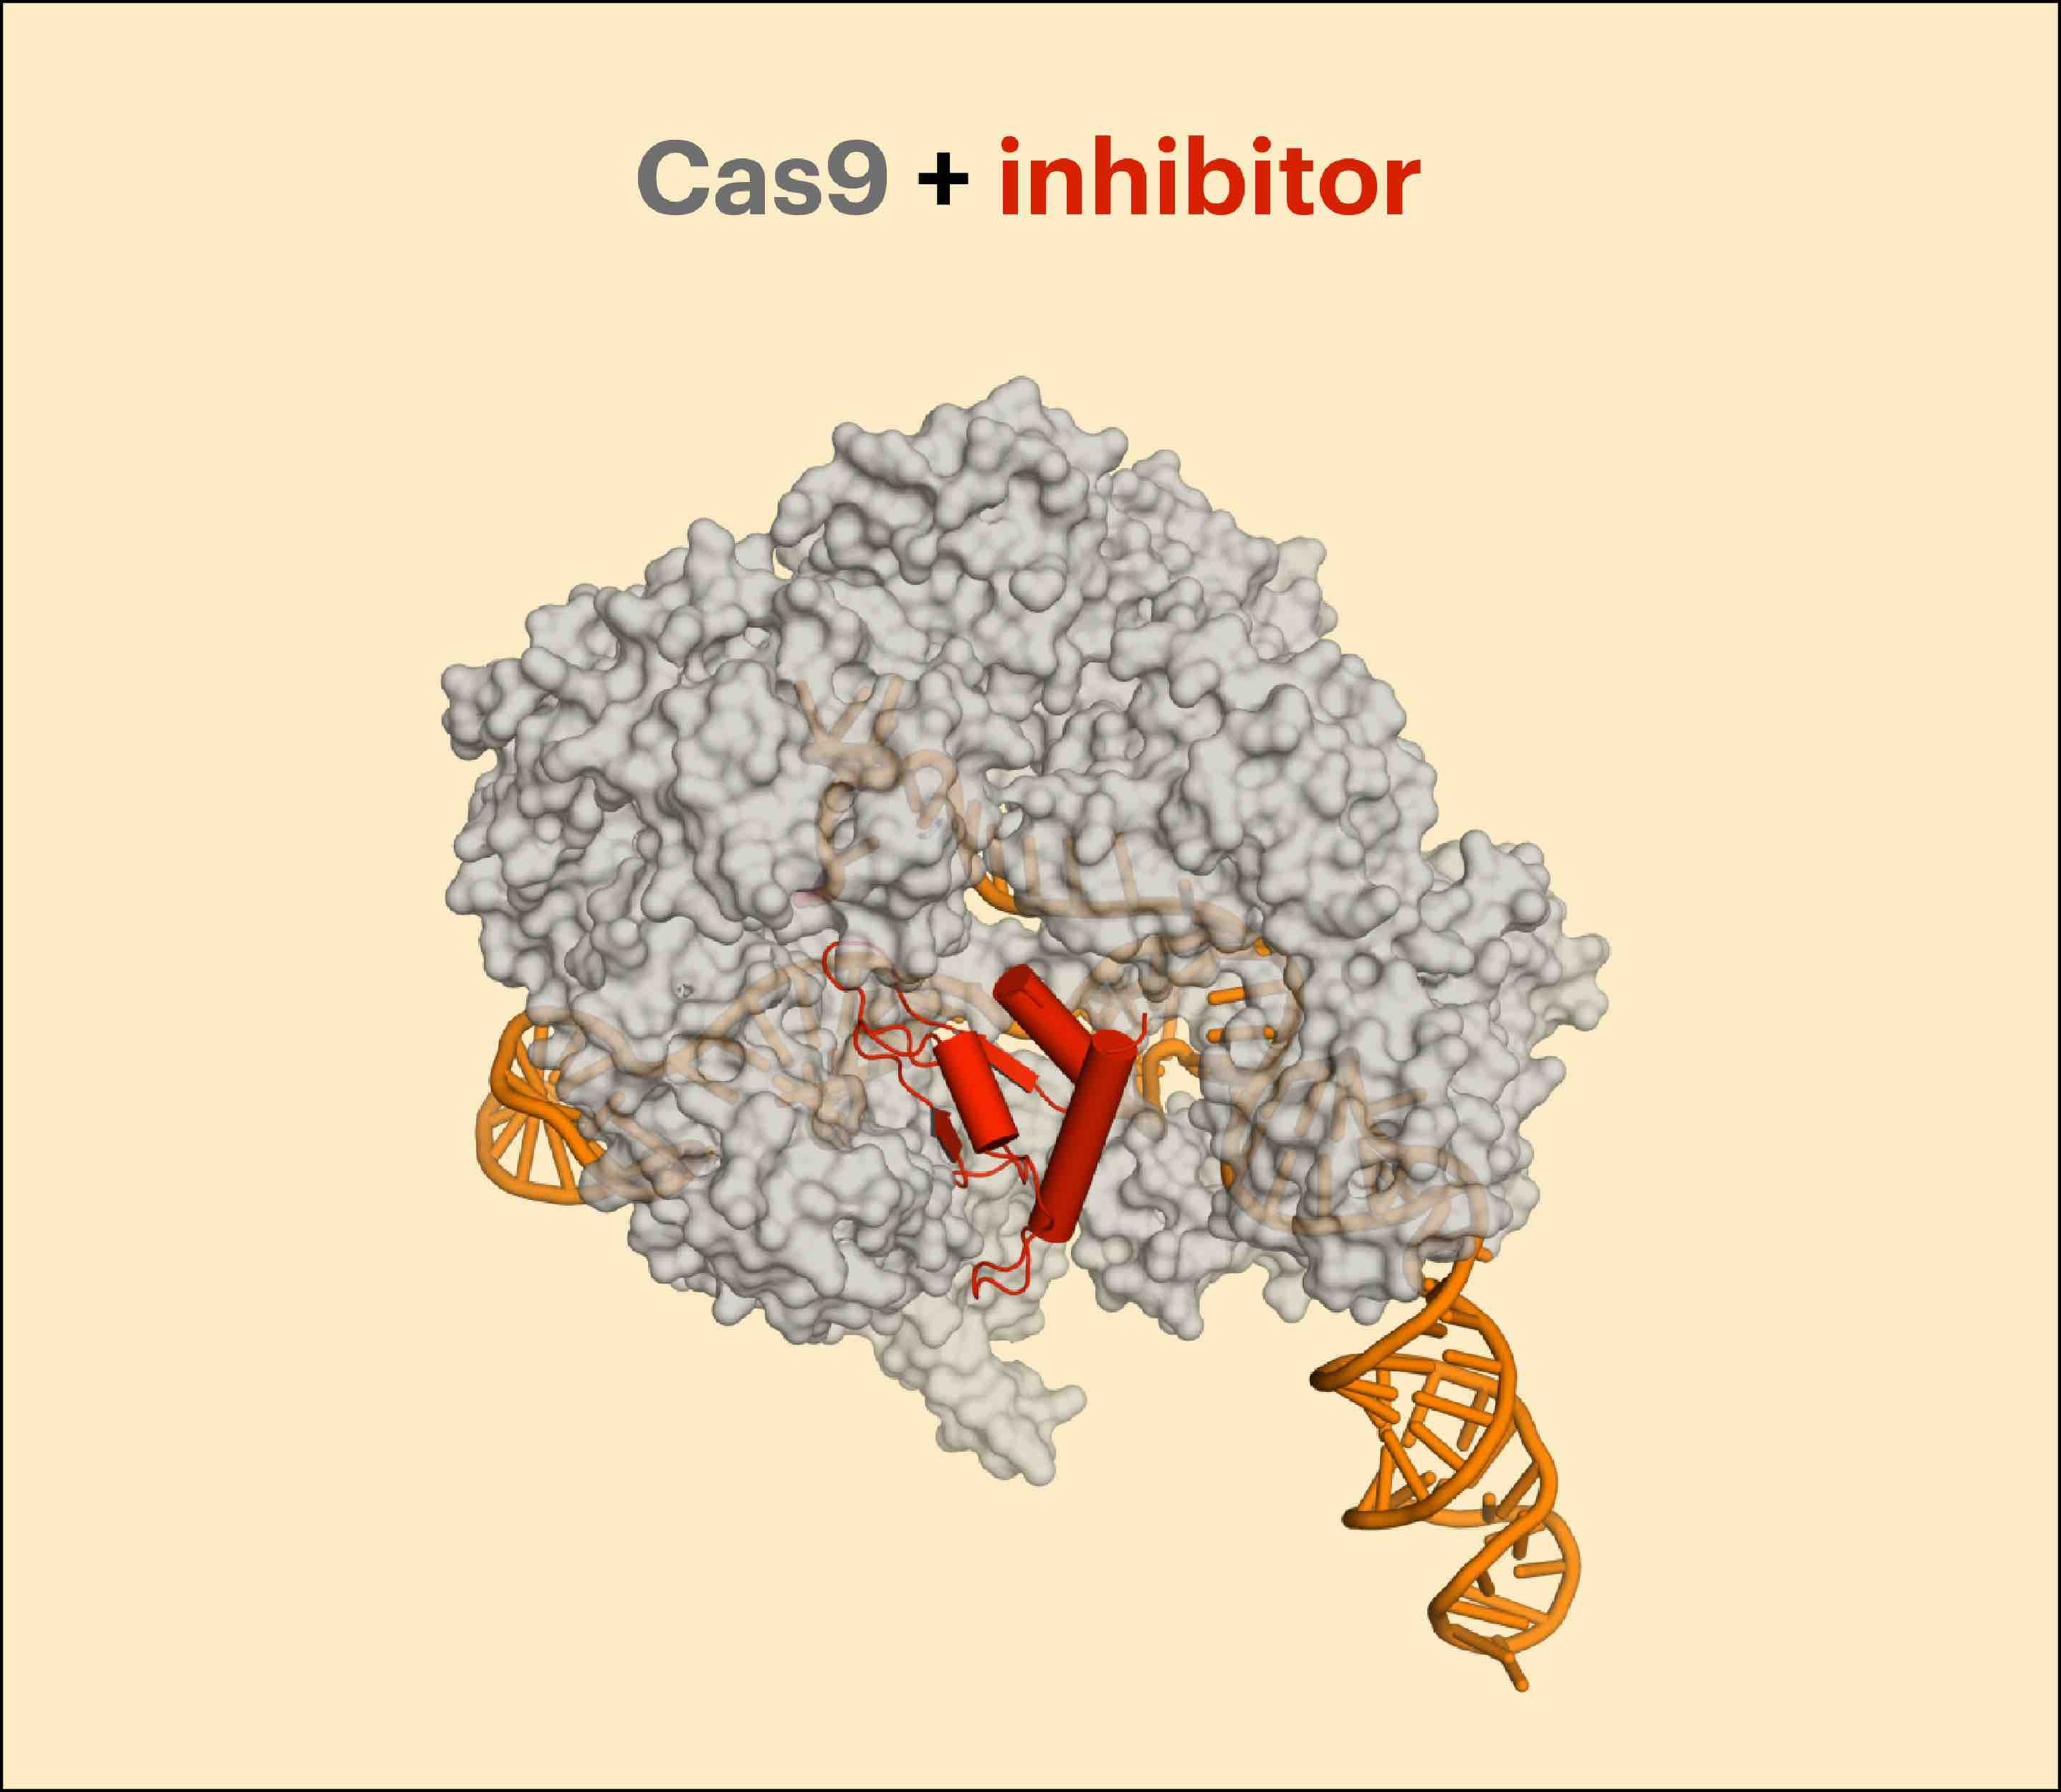 Cas9 inhibited by an anti-CRISPR protein that mimics DNA